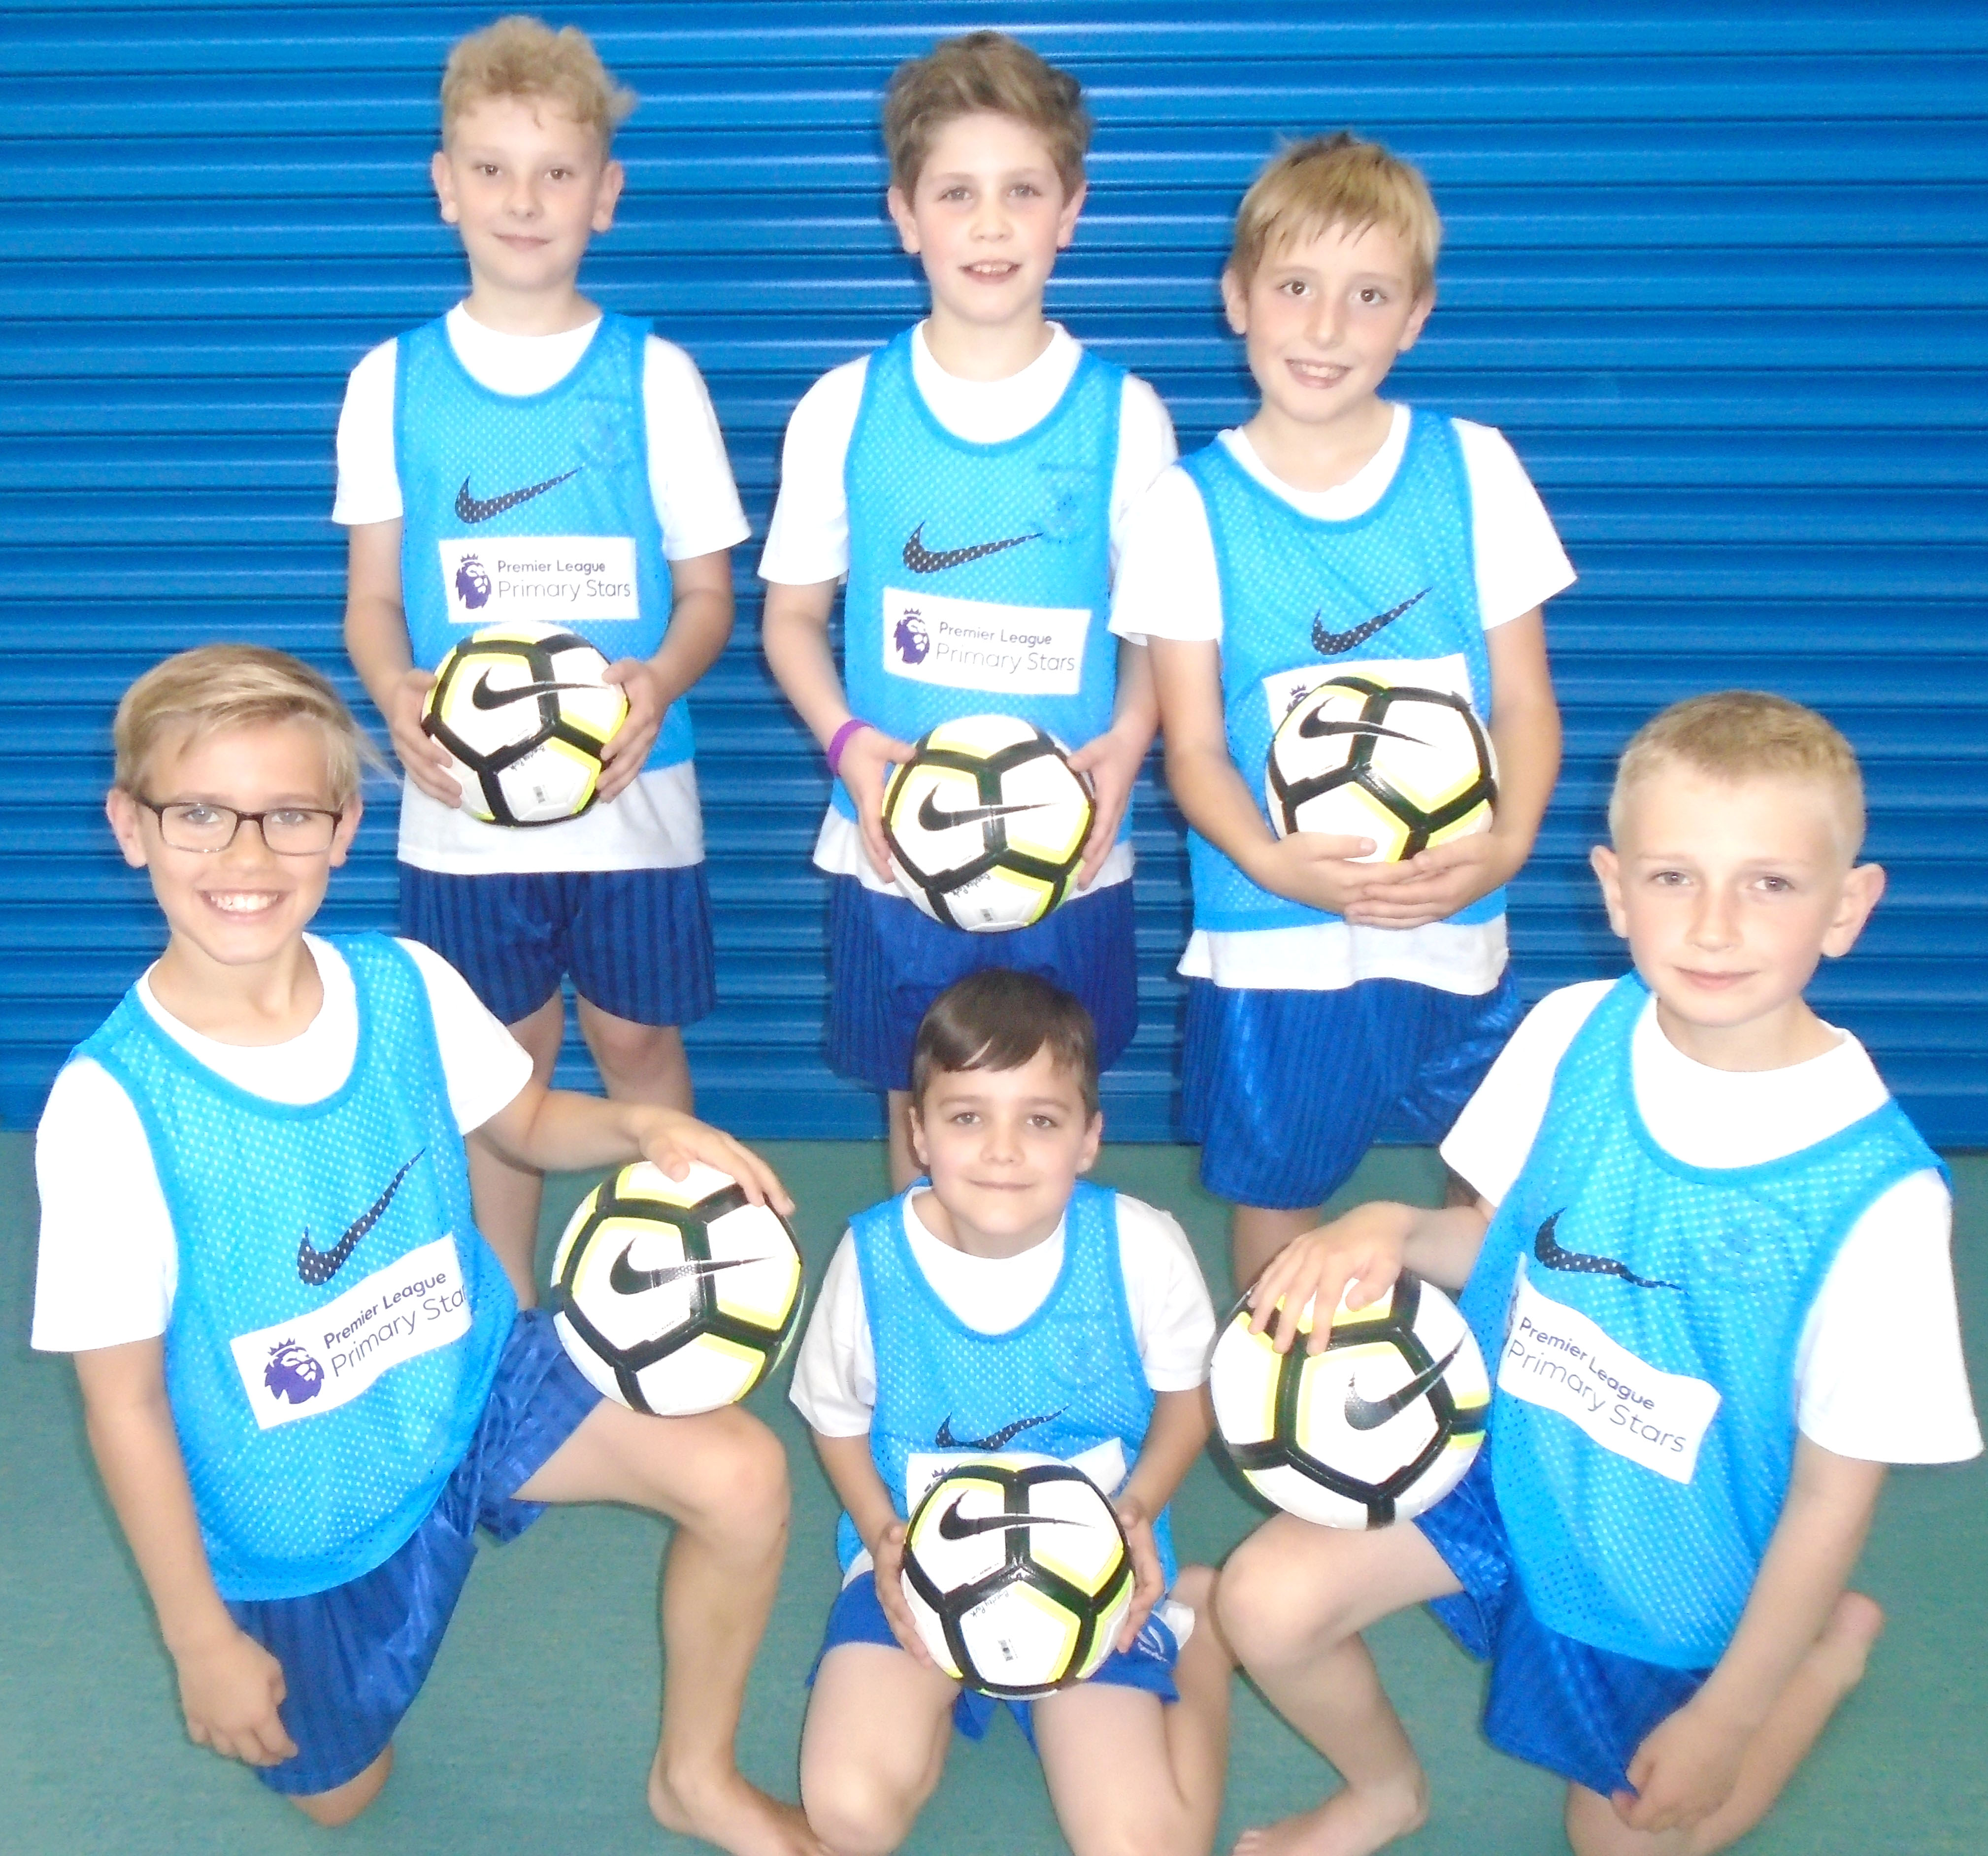 School Awarded Primary Stars Kit and Equipment